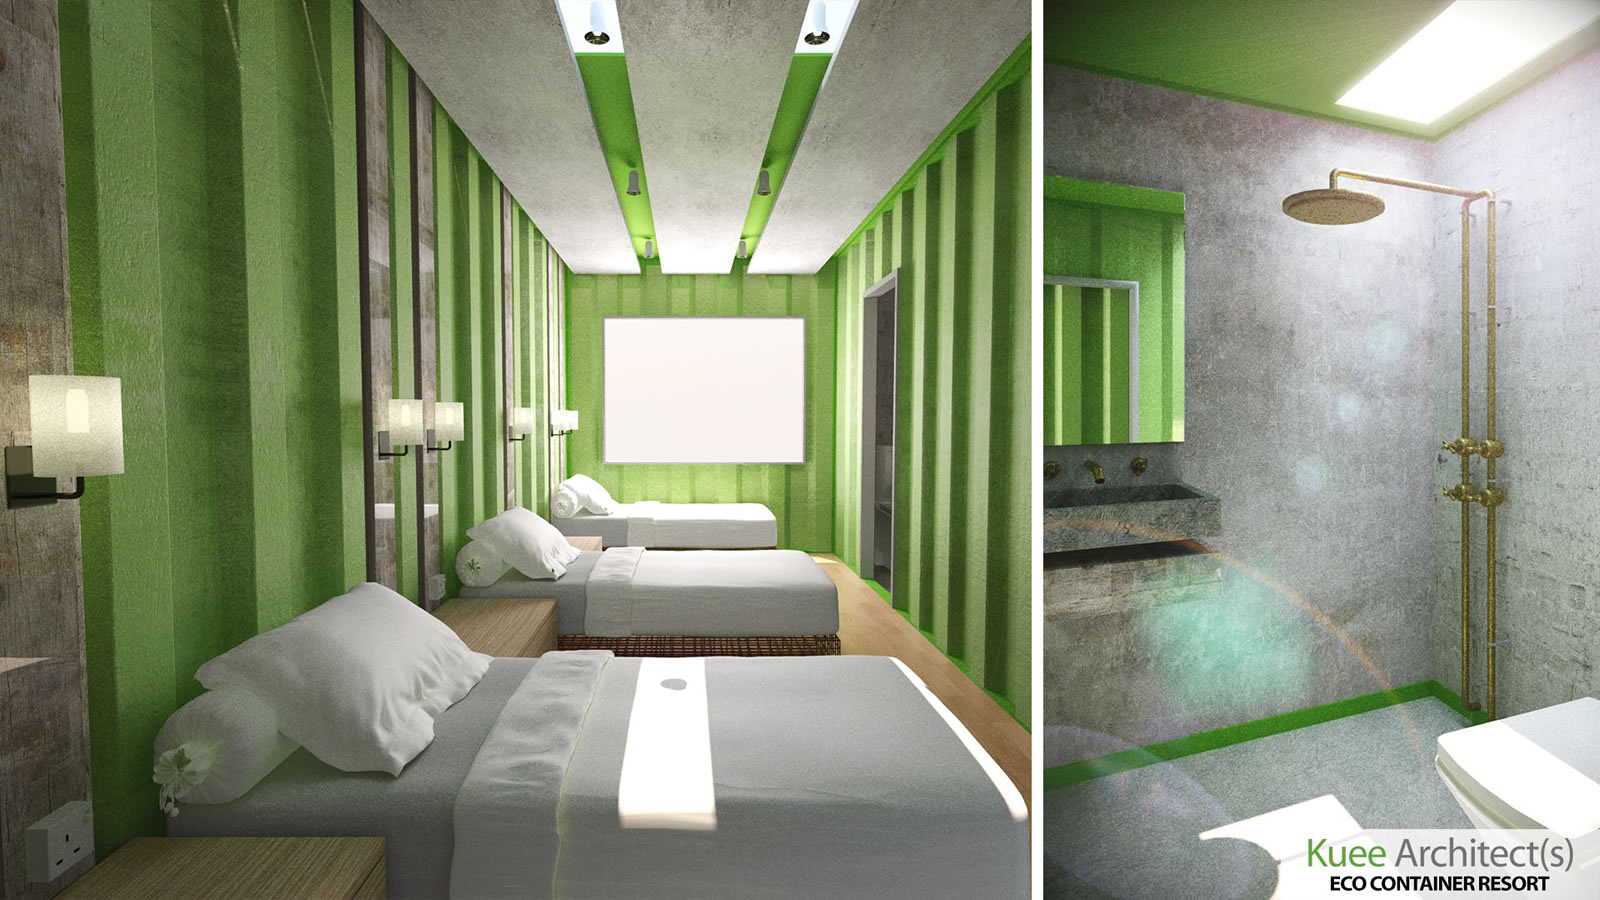 Container hotel design Kuee architect